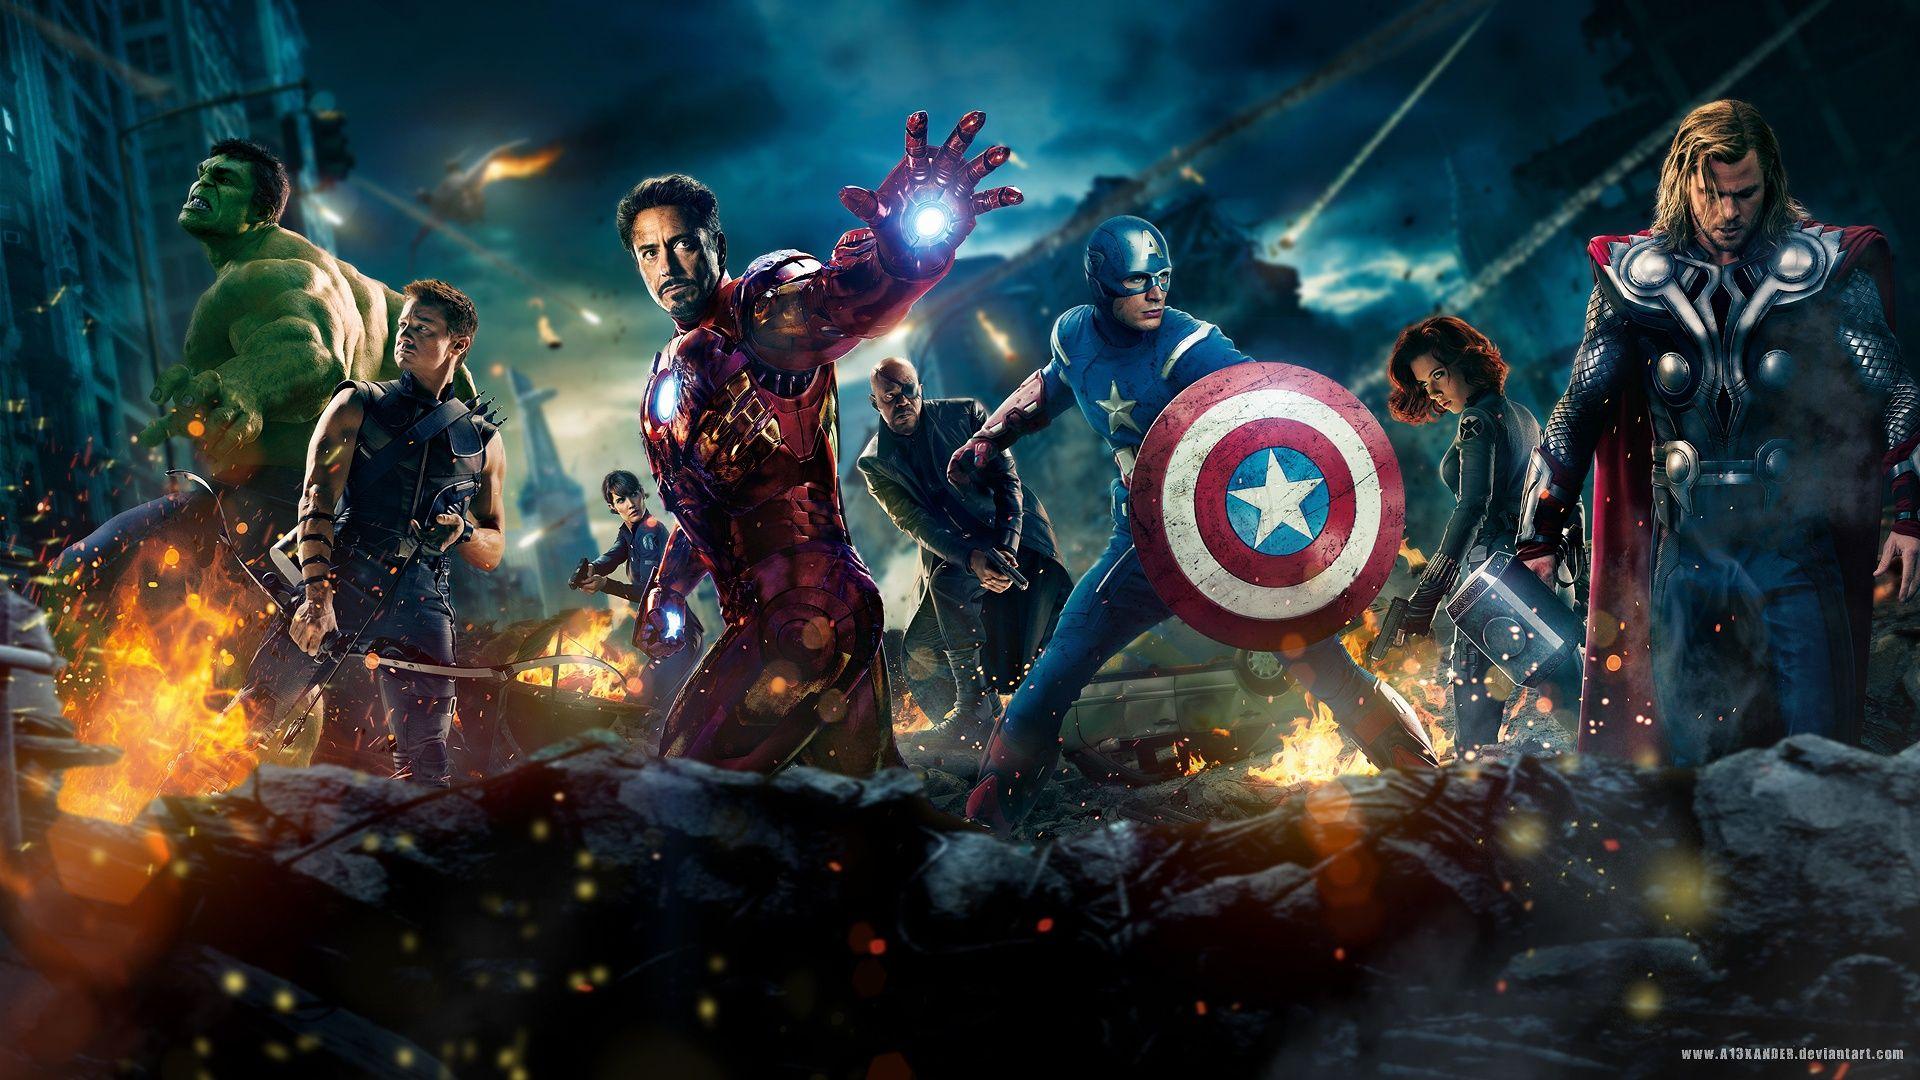 Avengers Full HD Wallpapers - Top Free ...